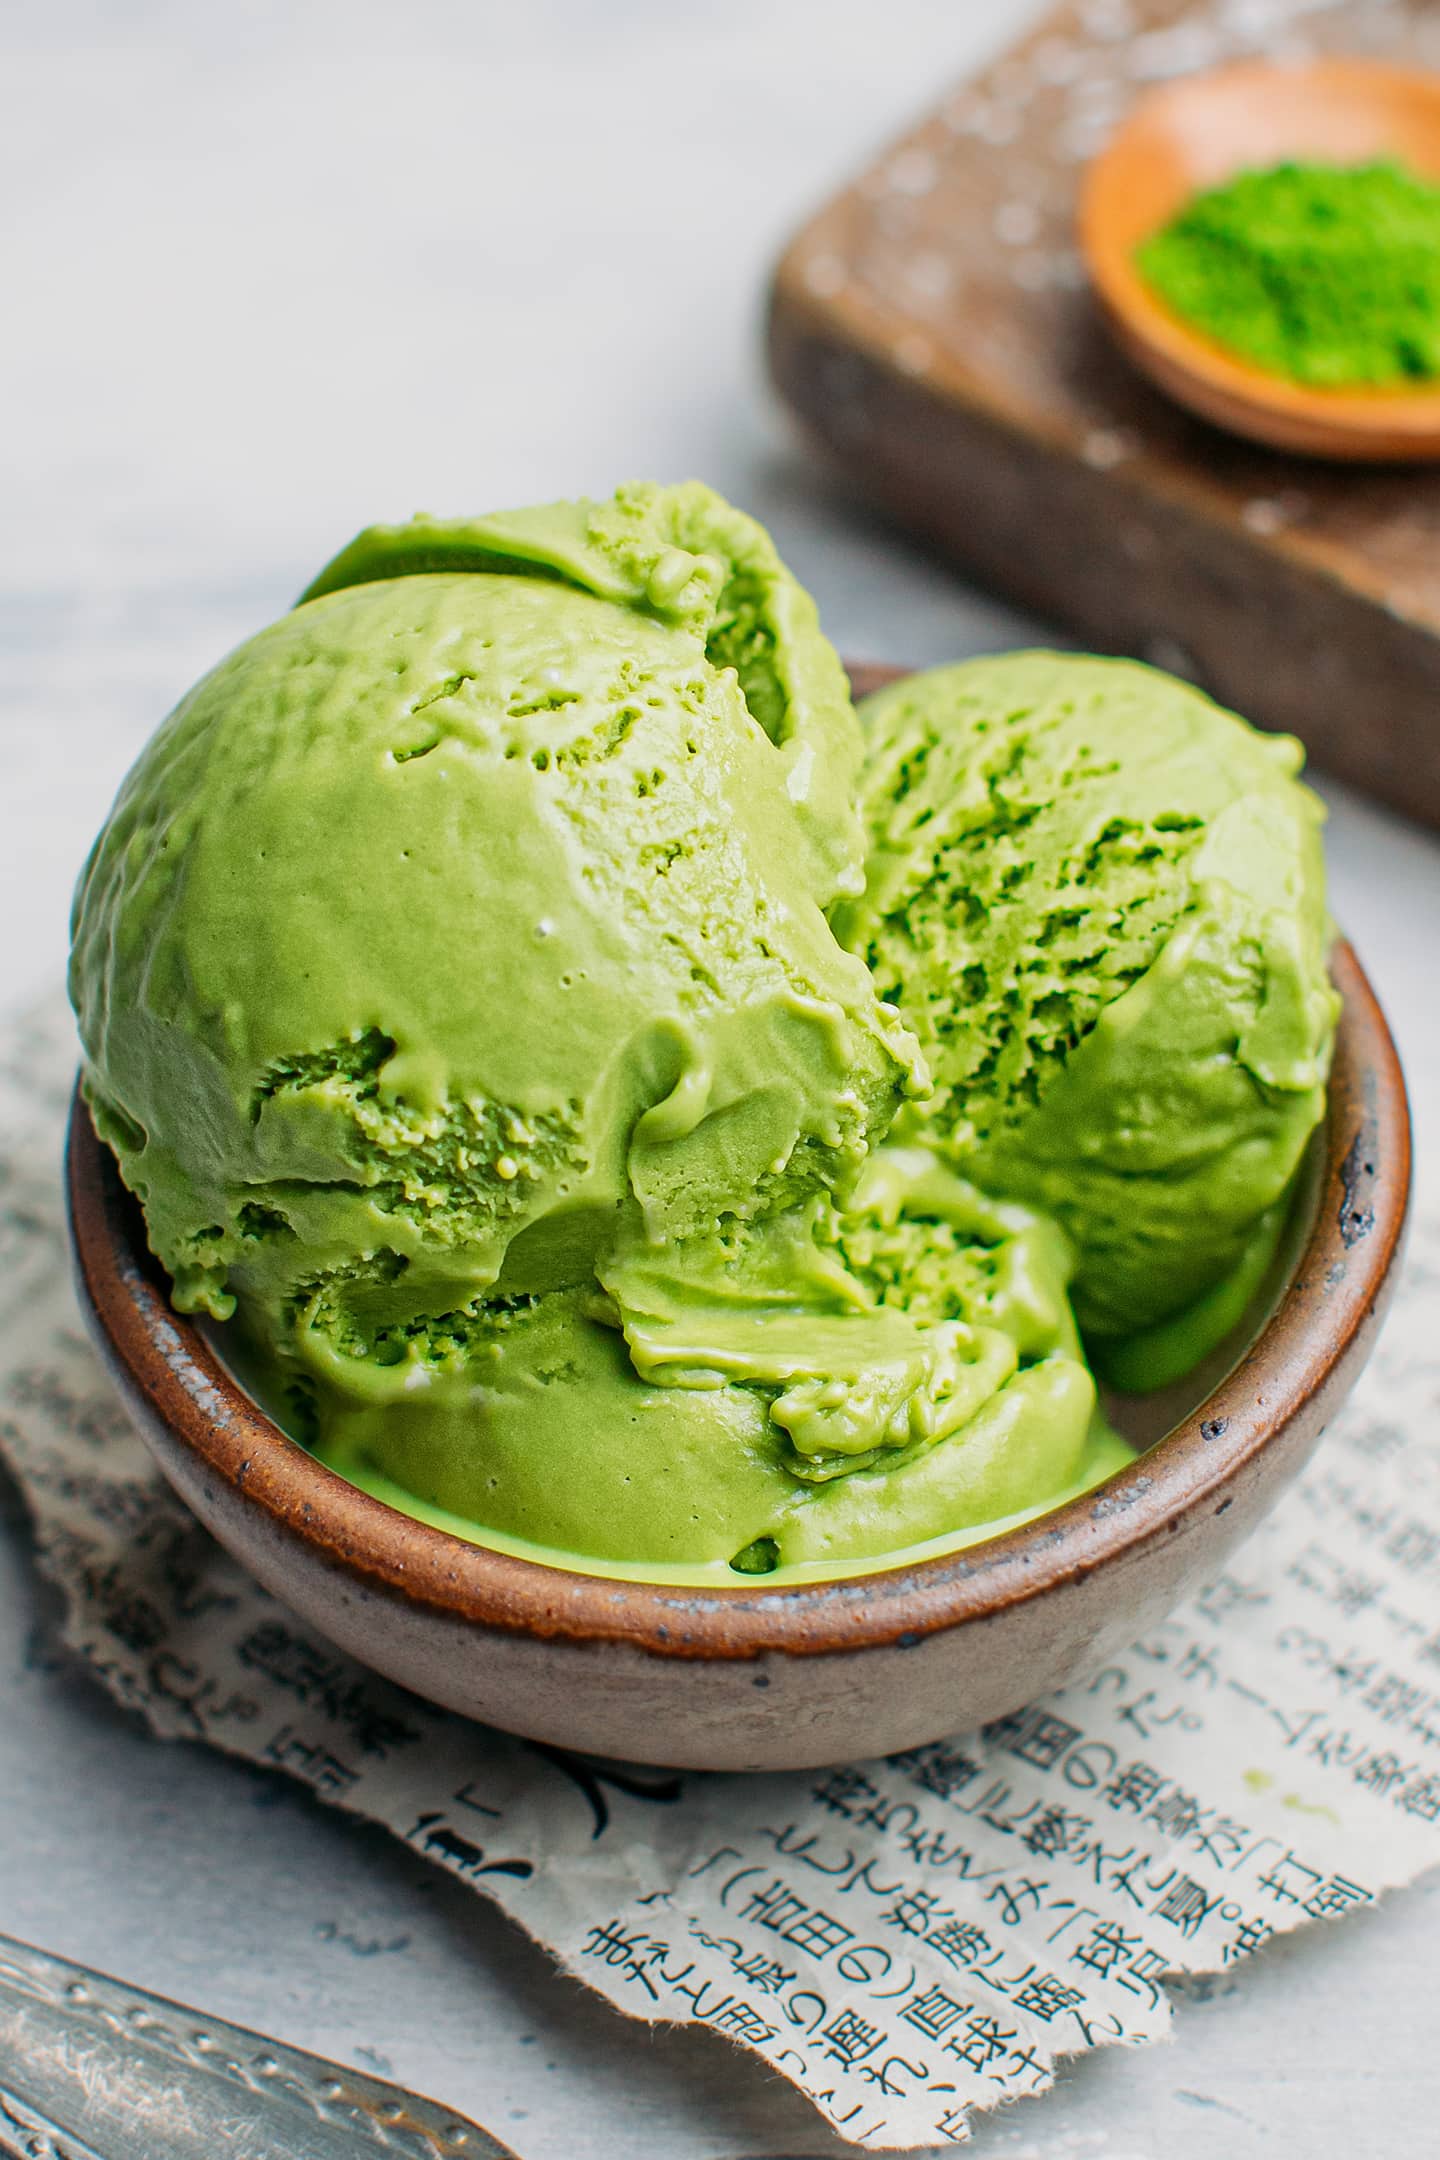 Scoops of vegan matcha ice cream in a bowl.